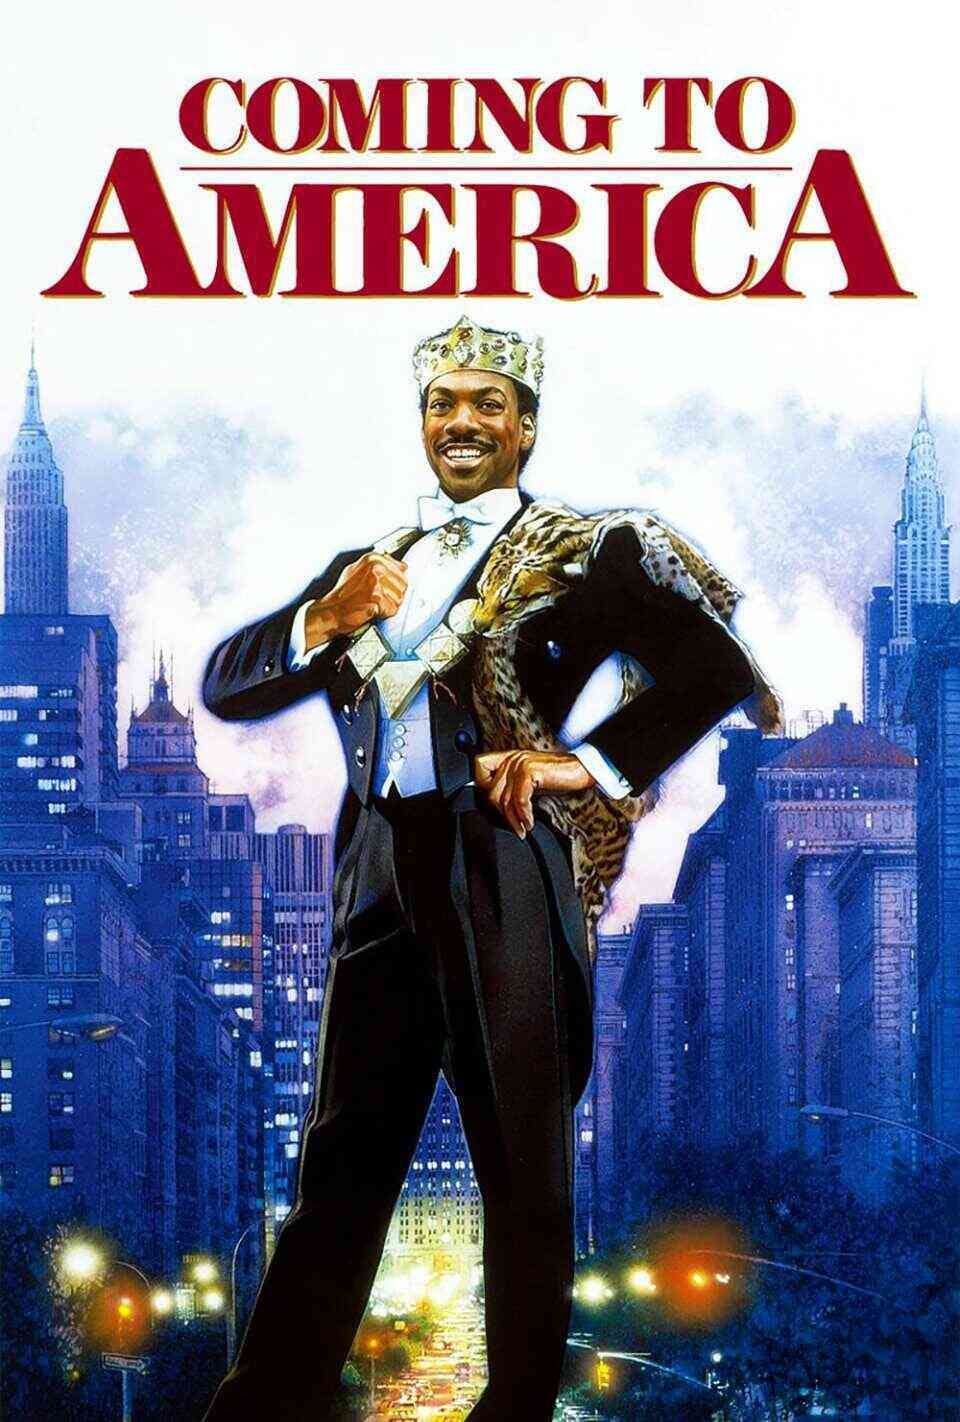 Read Coming to America screenplay (poster)